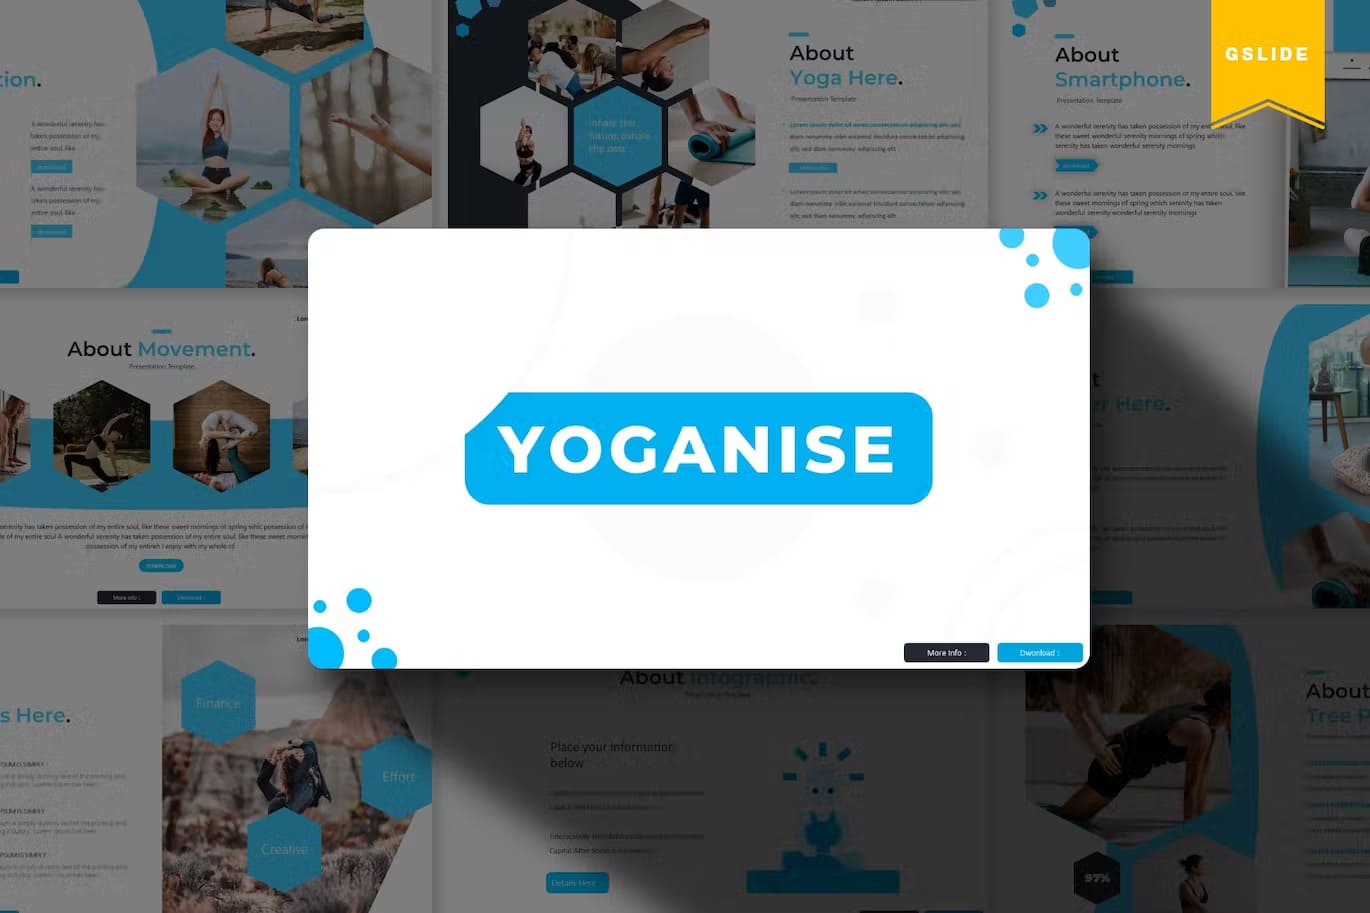 On a white rectangle with blue circles in the corners is the inscription "Yoganise".